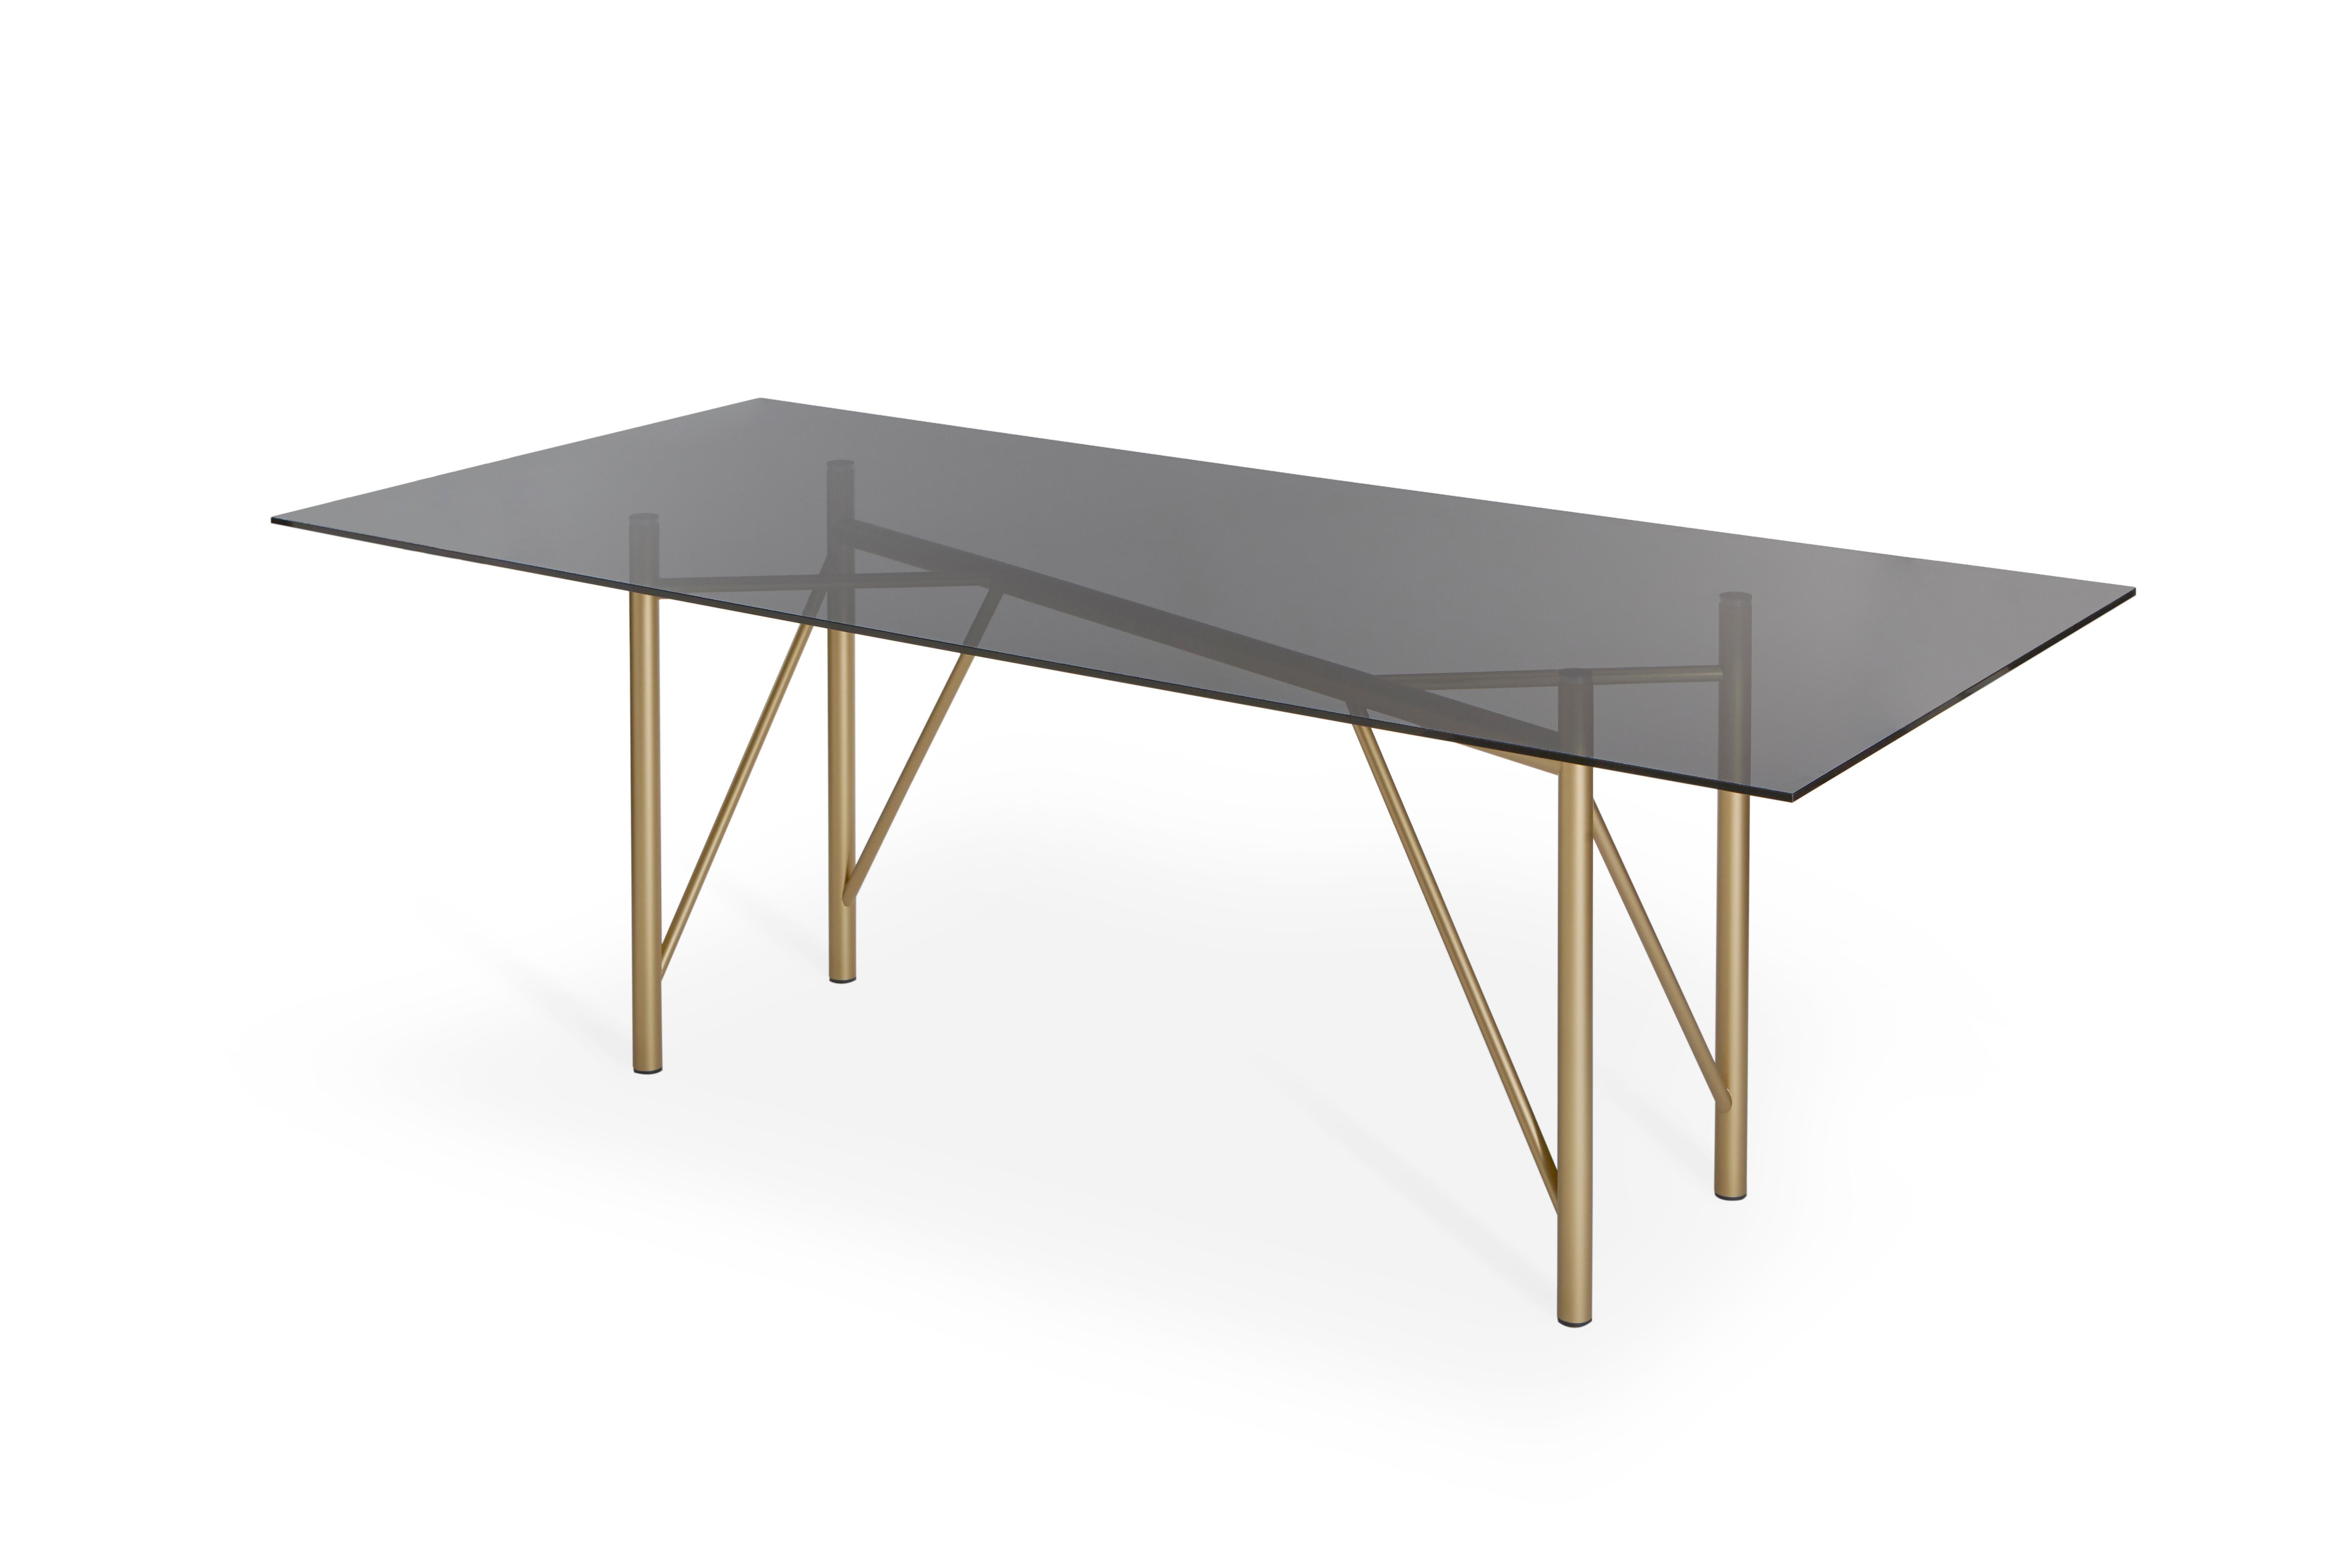 Tubolar table by Mentemano
Dimensions: W 220 x D 100 x H 75 cm
Materials: painted matt brass, smoked grey top

The project is based on lightness and attention to details. Volumes and lines are the result of technical and aesthetic process